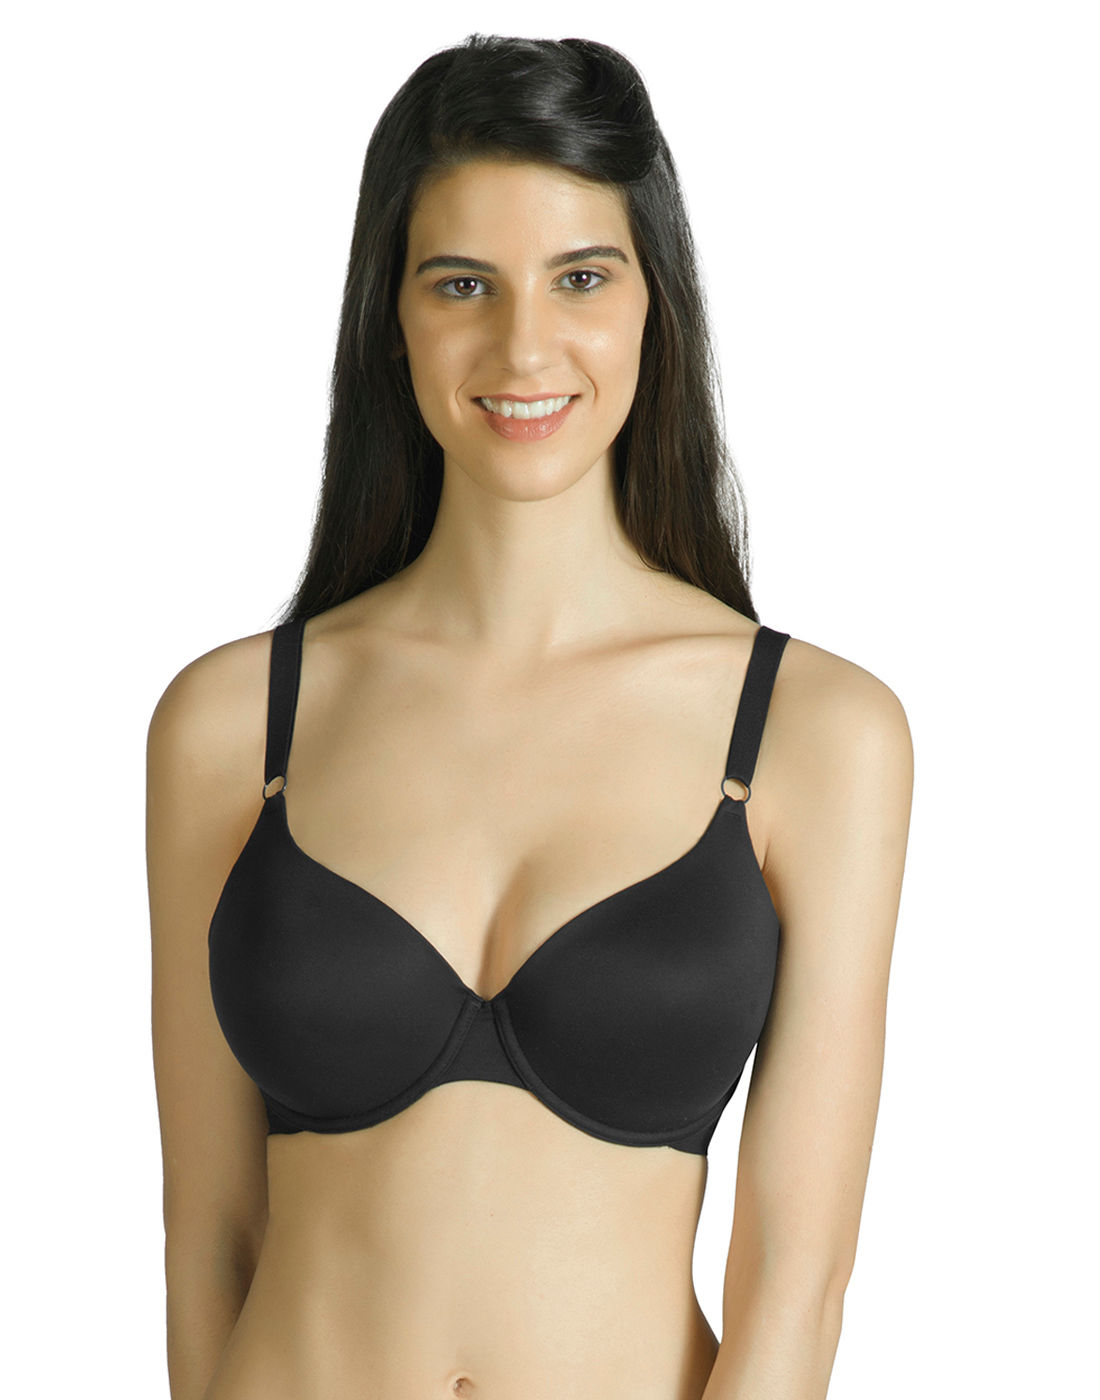 Amante Comfy Wings Padded Wired T-Shirt Bra - Black (40C)